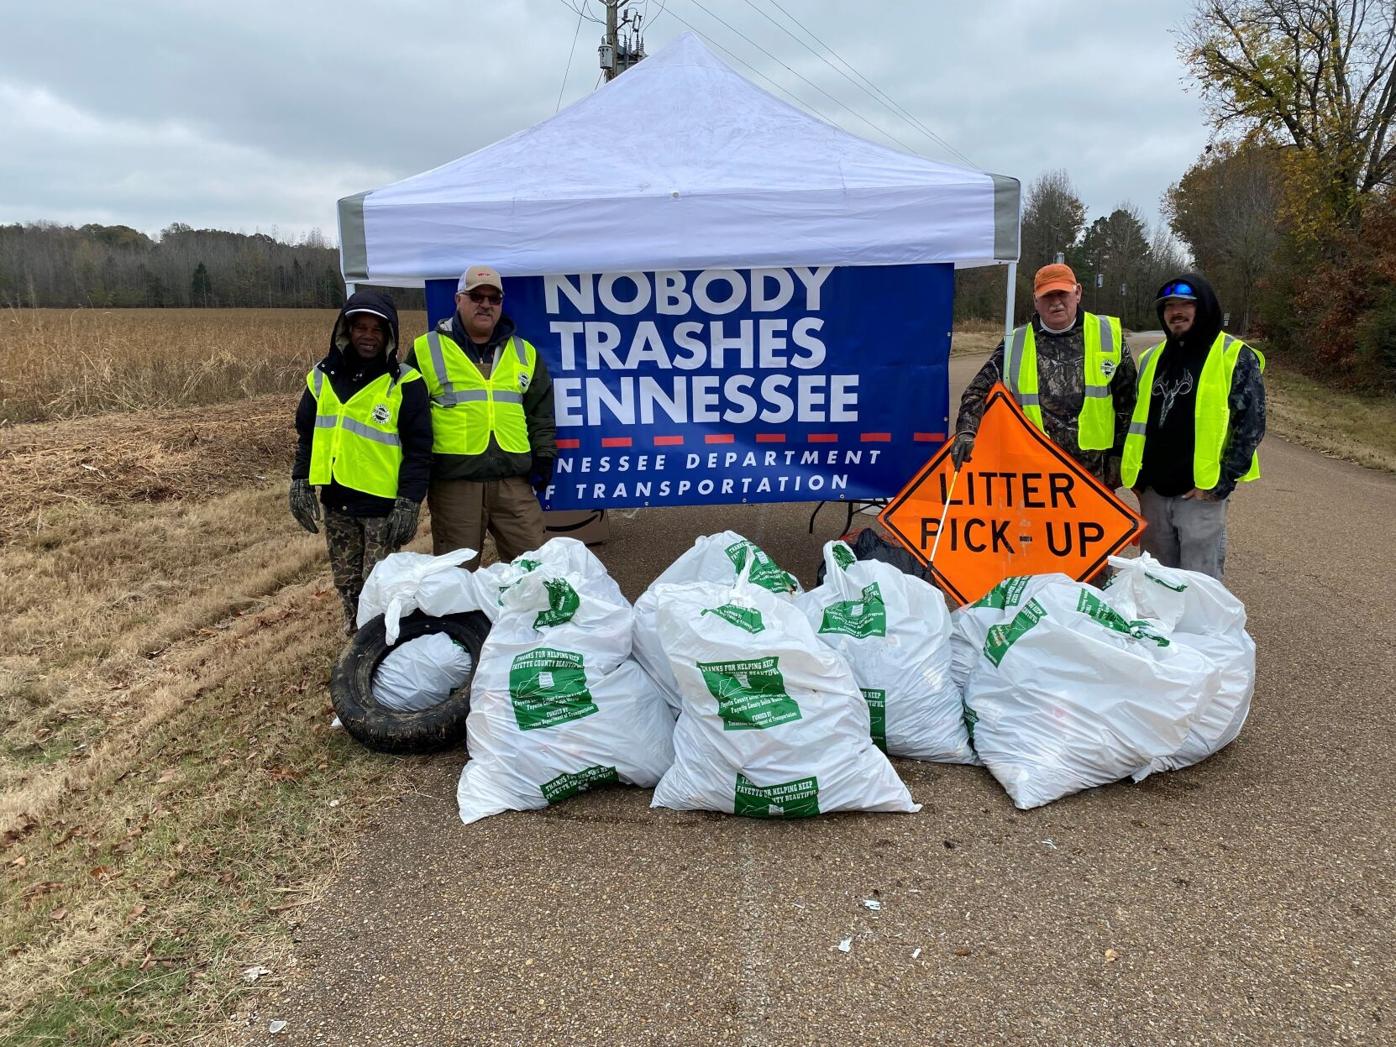 Adopt-A-Highway - Nobody Trashes Tennessee